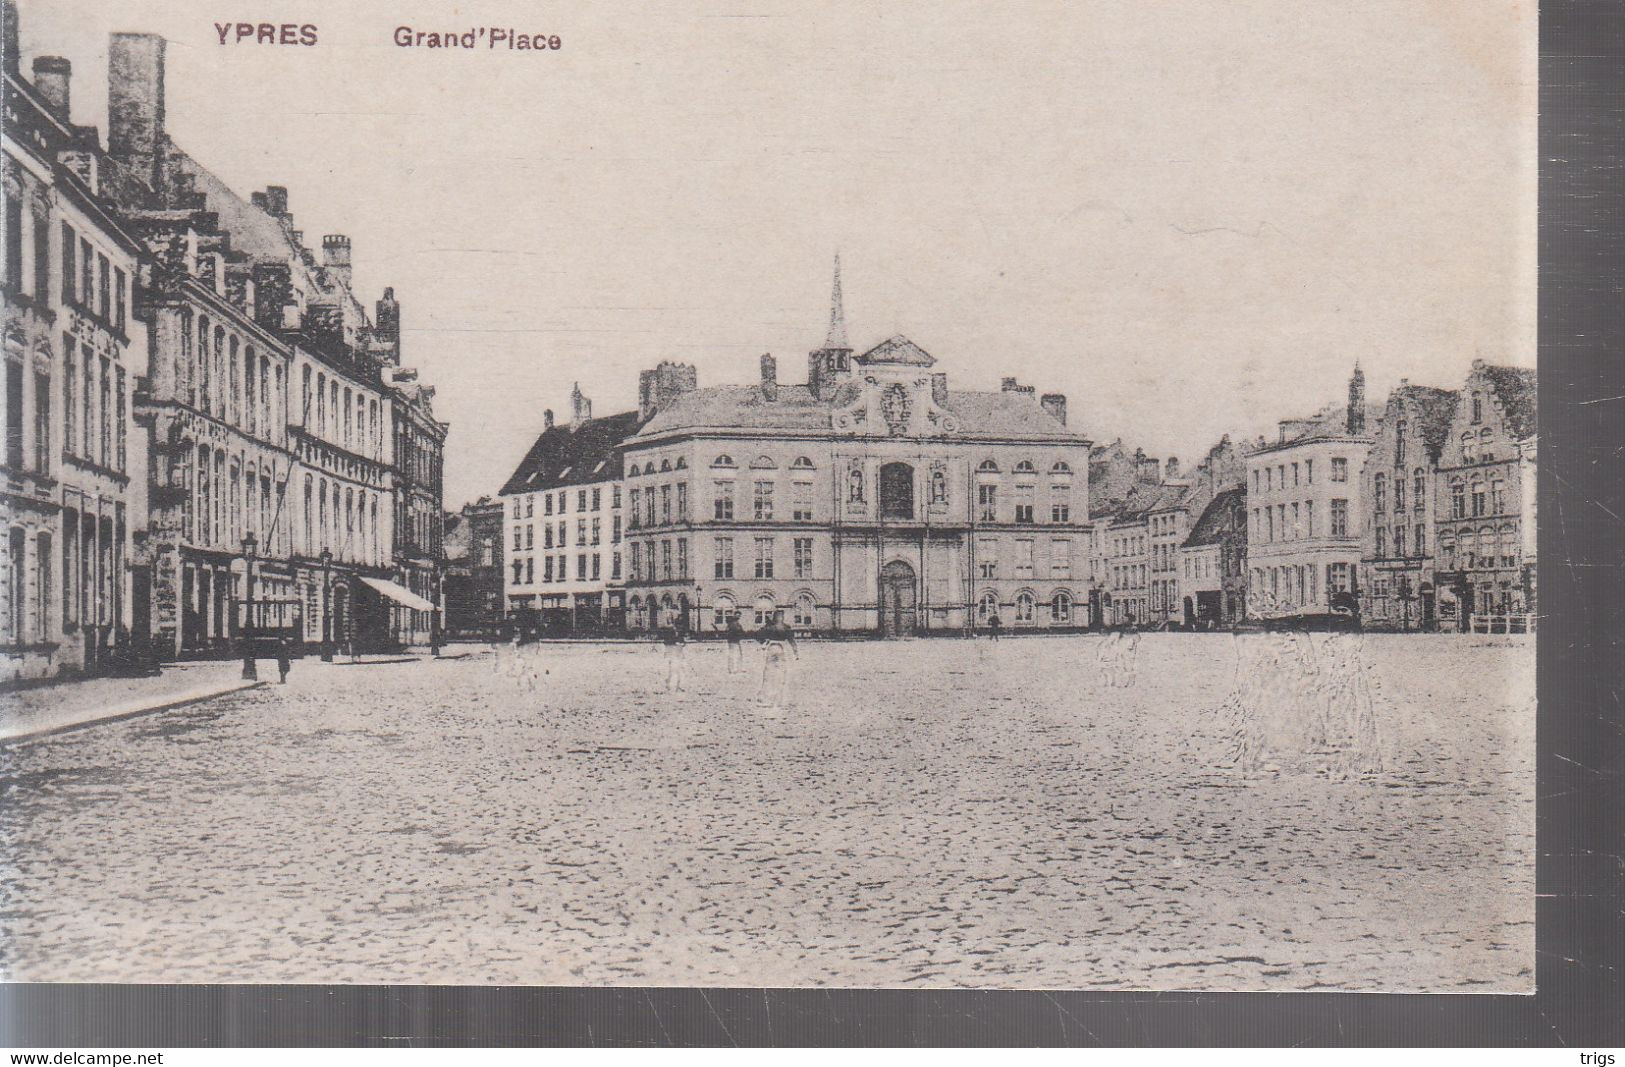 Ypres - Grand'Place - Ieper